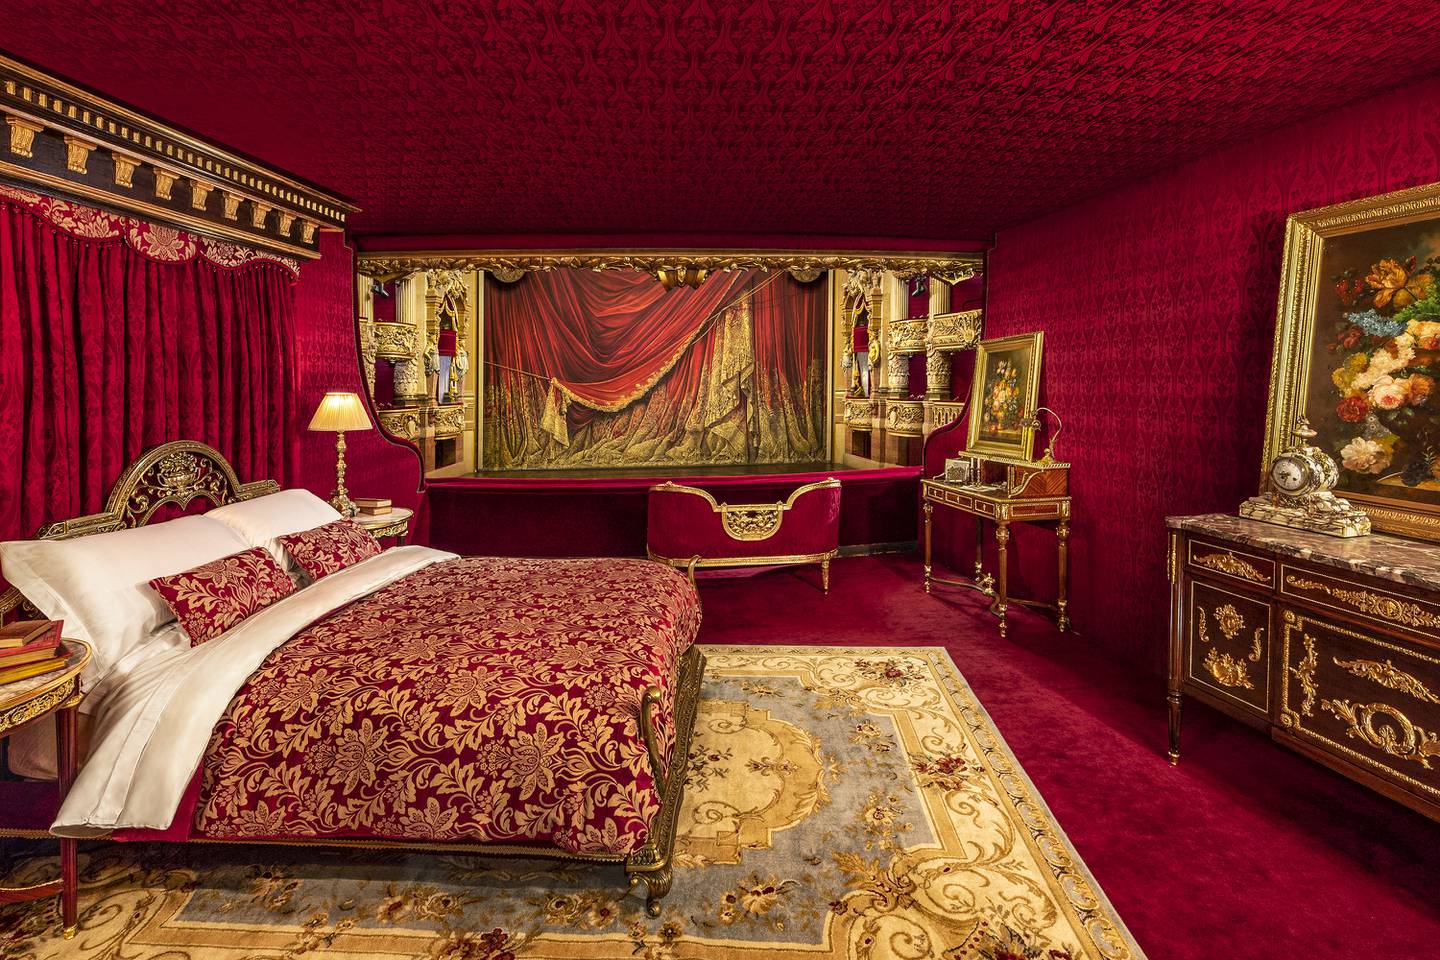 Guests will sleep in a bedroom created in the Box of Honours. Photo: Airbnb